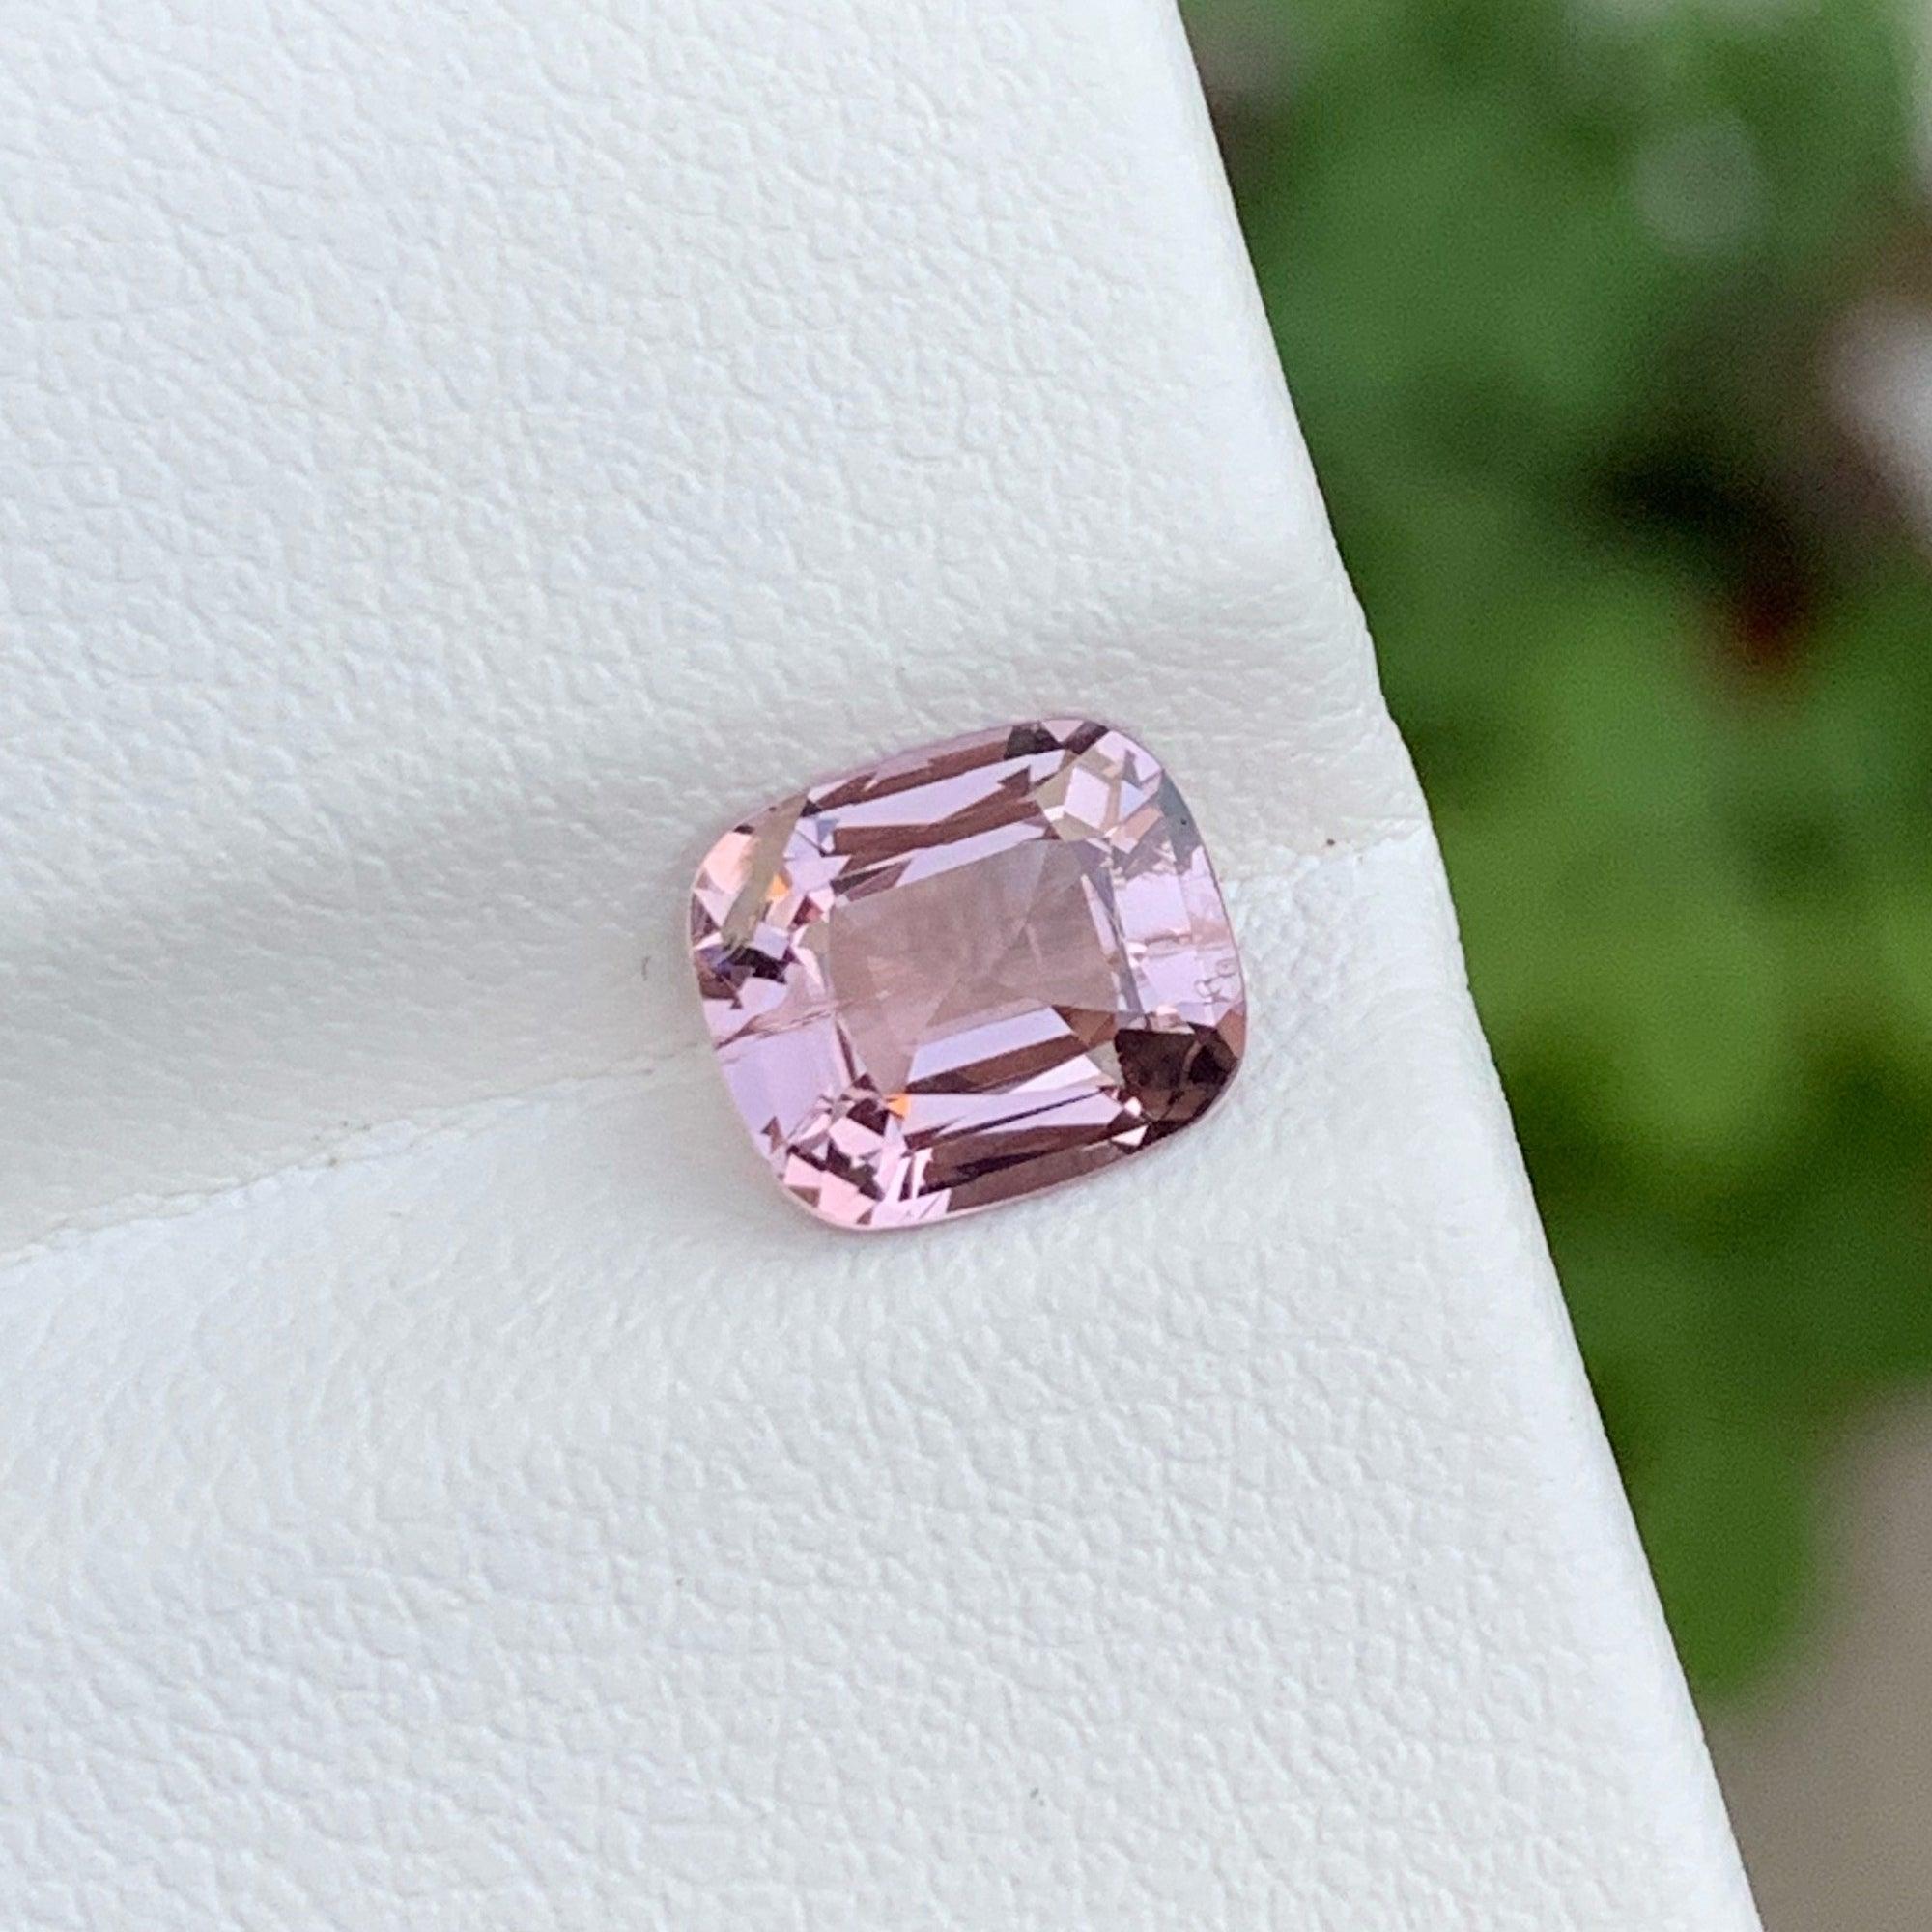 Excellent Bright Pink Cut Spinel Gemstone of 1.85 carats from Burma has a wonderful cut in a Cushion shape, incredible Pink color. Great brilliance. This gem is Eye Clean Clarity.

Product Information:
GEMSTONE TYPE:	Excellent Bright Pink Cut Spinel